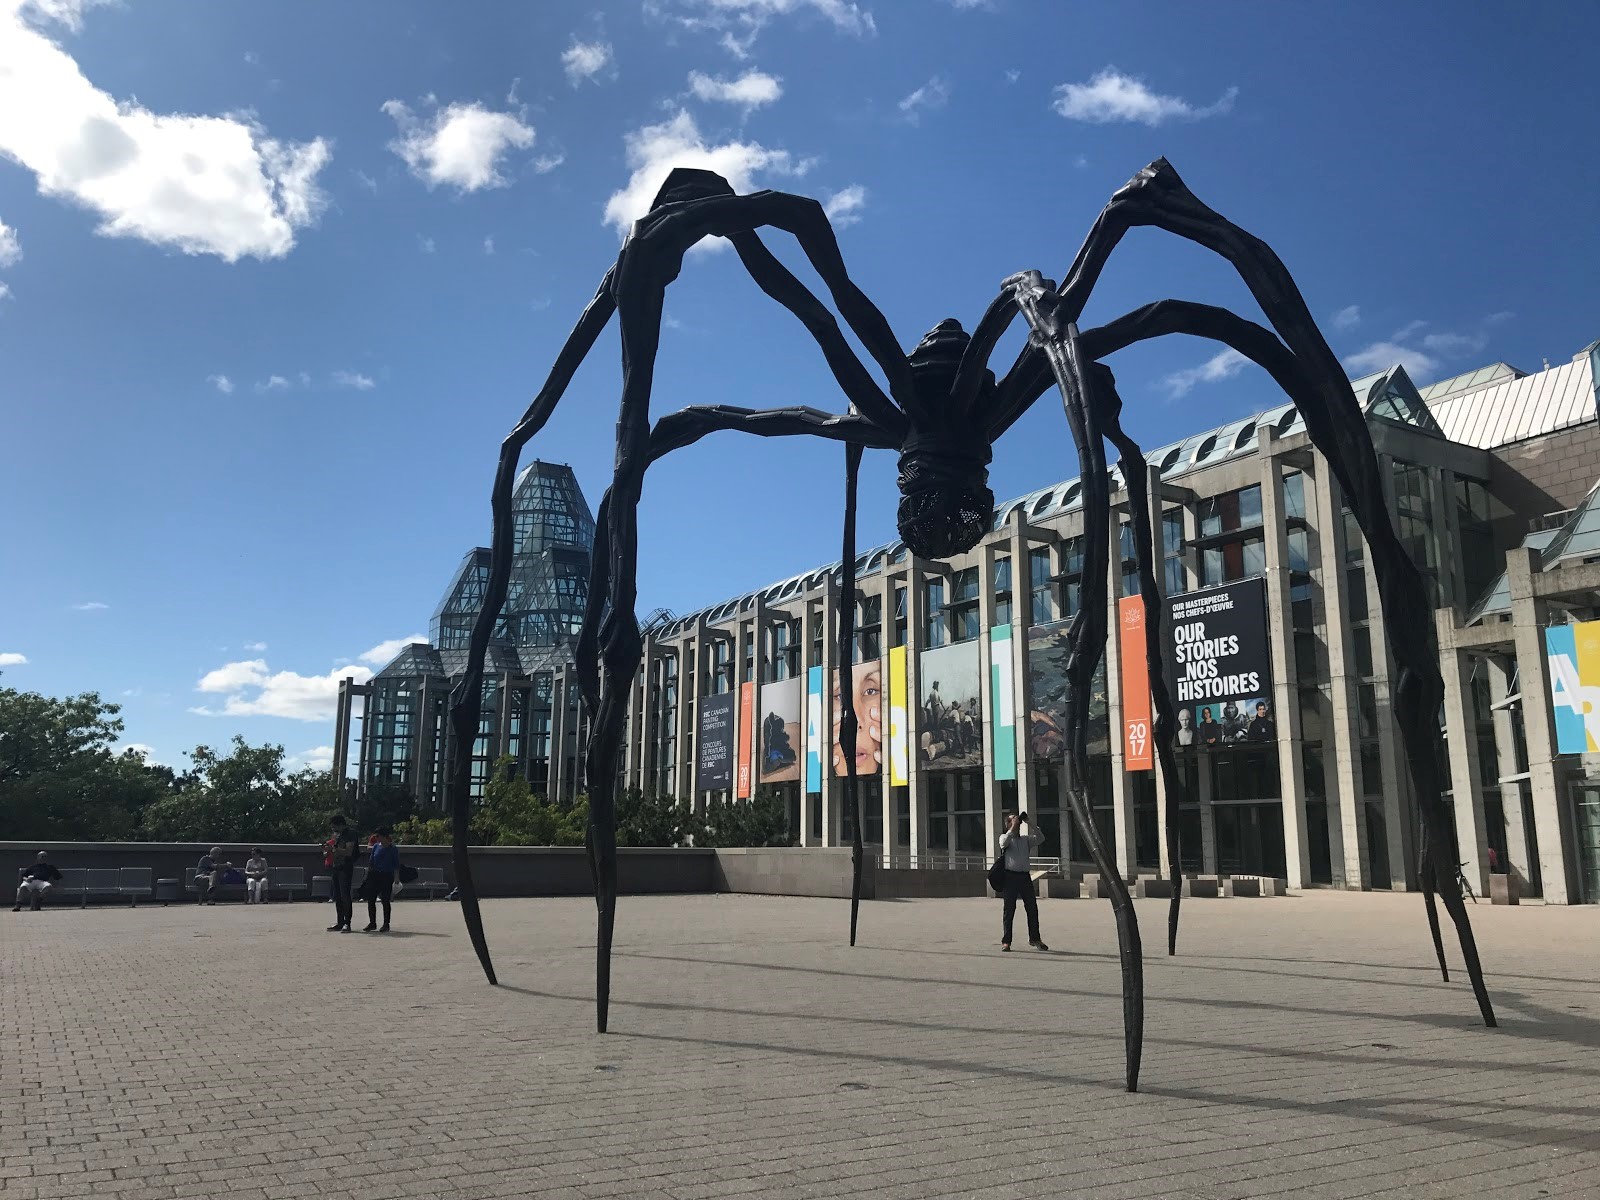 A large sculpture of a spider stands in front of a museum in Canada.